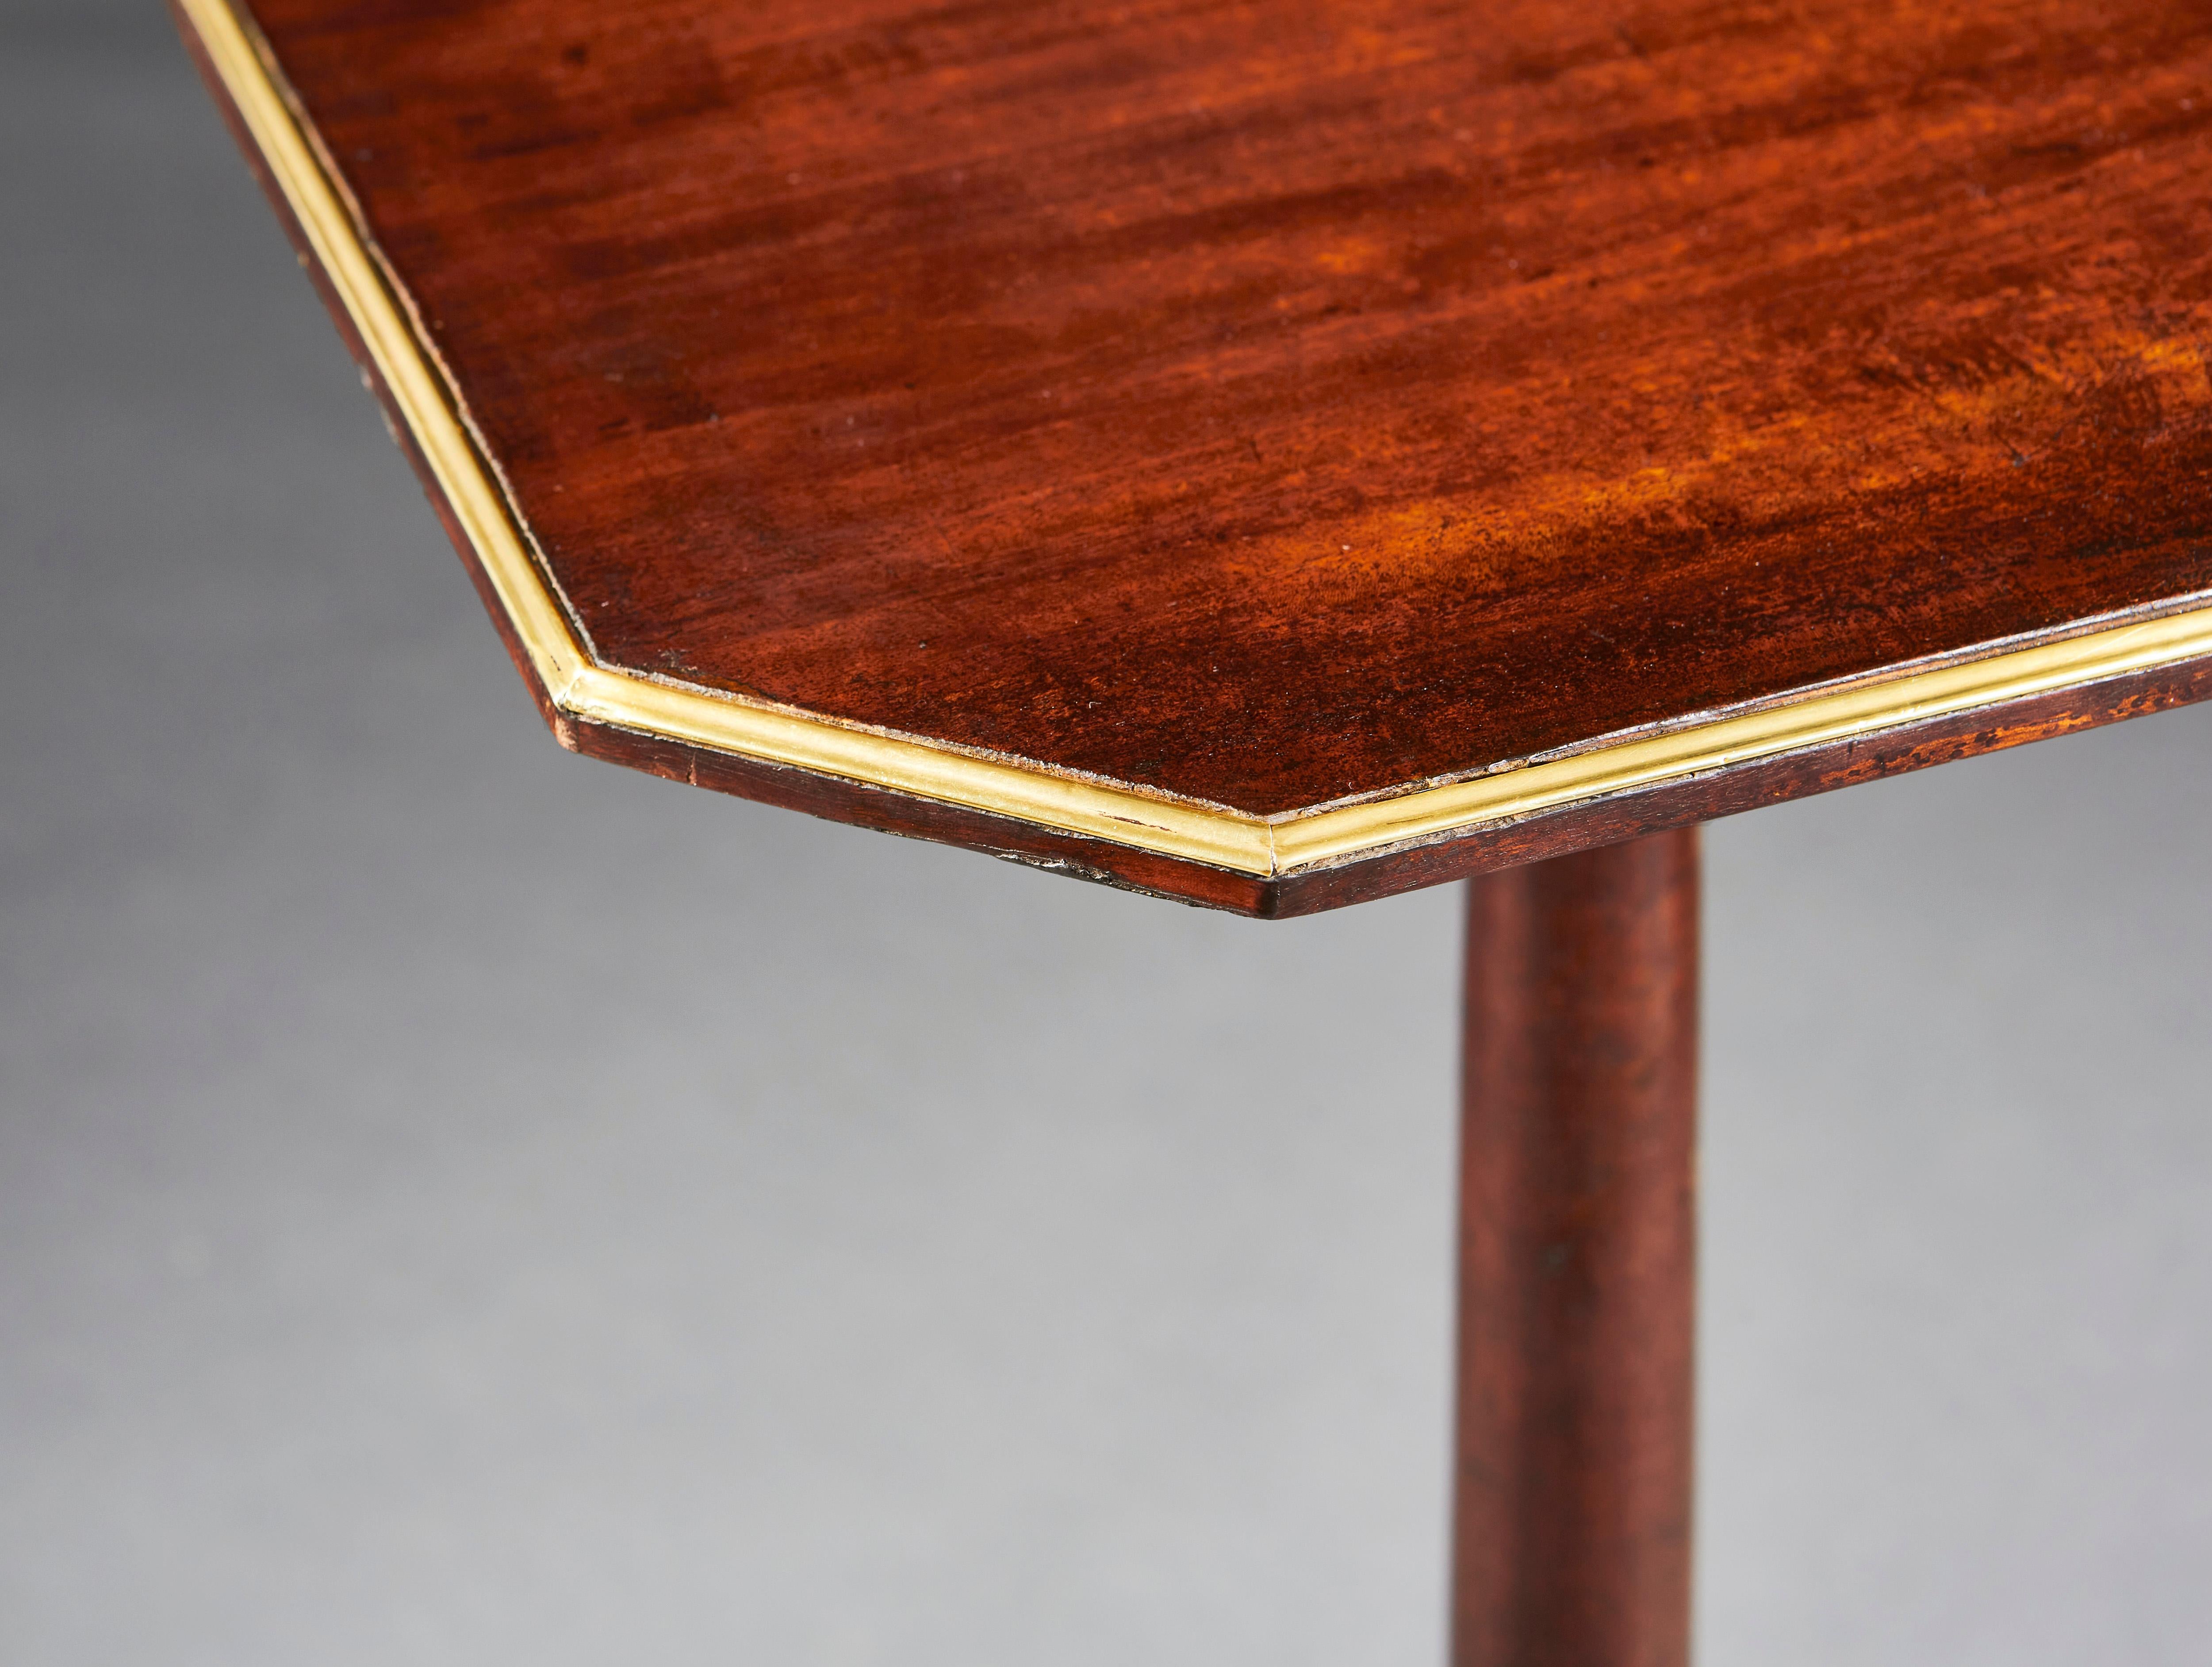 English Pair of 19th Century Mahogany Wood and Brass Banded Tripod Tables